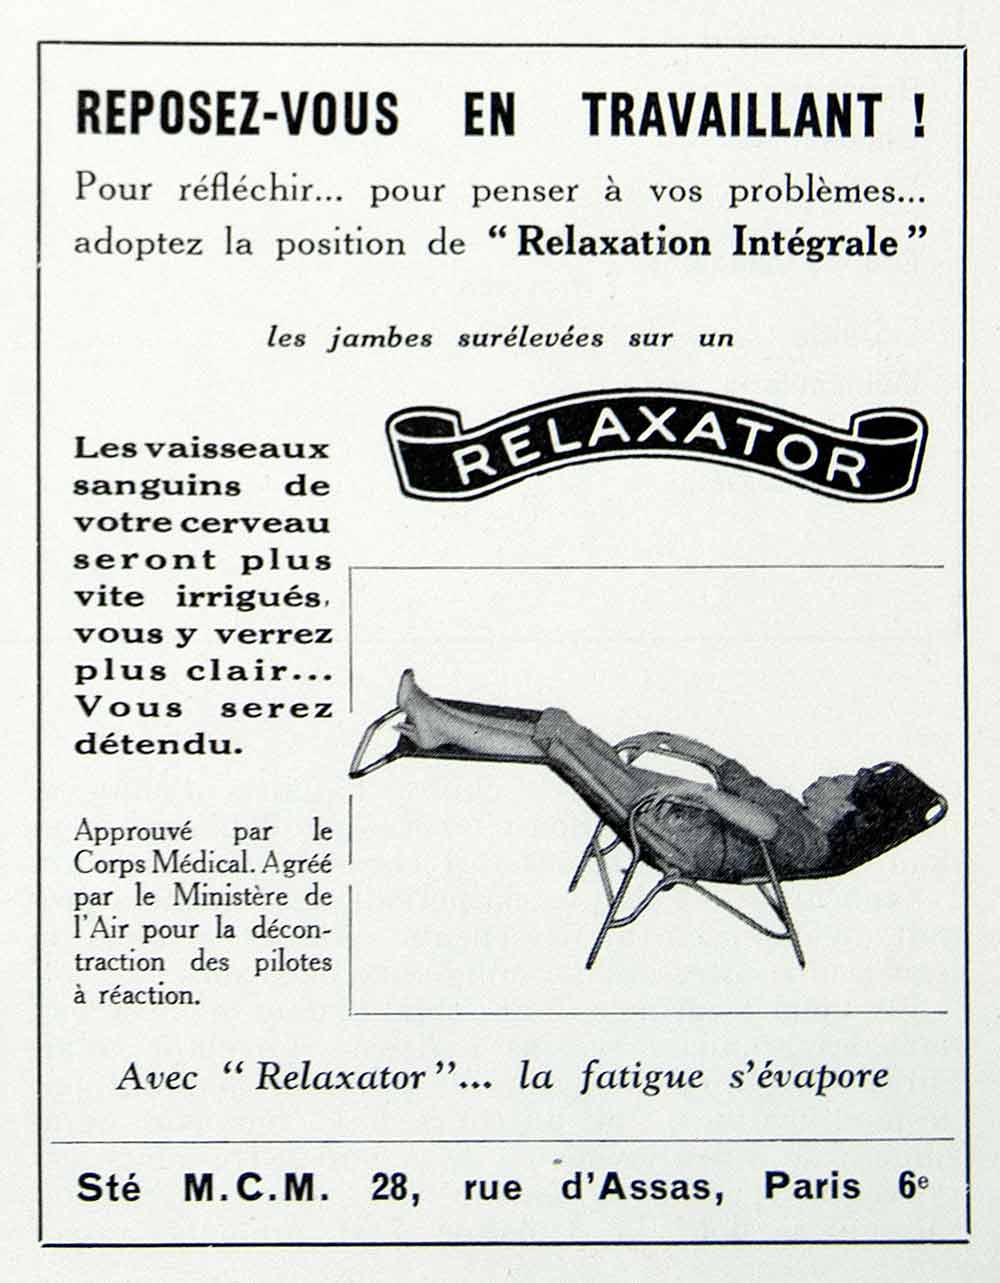 1955 Ad Relaxator French Reclining Chair Elevated Feet Legs Health Relaxing VEN6